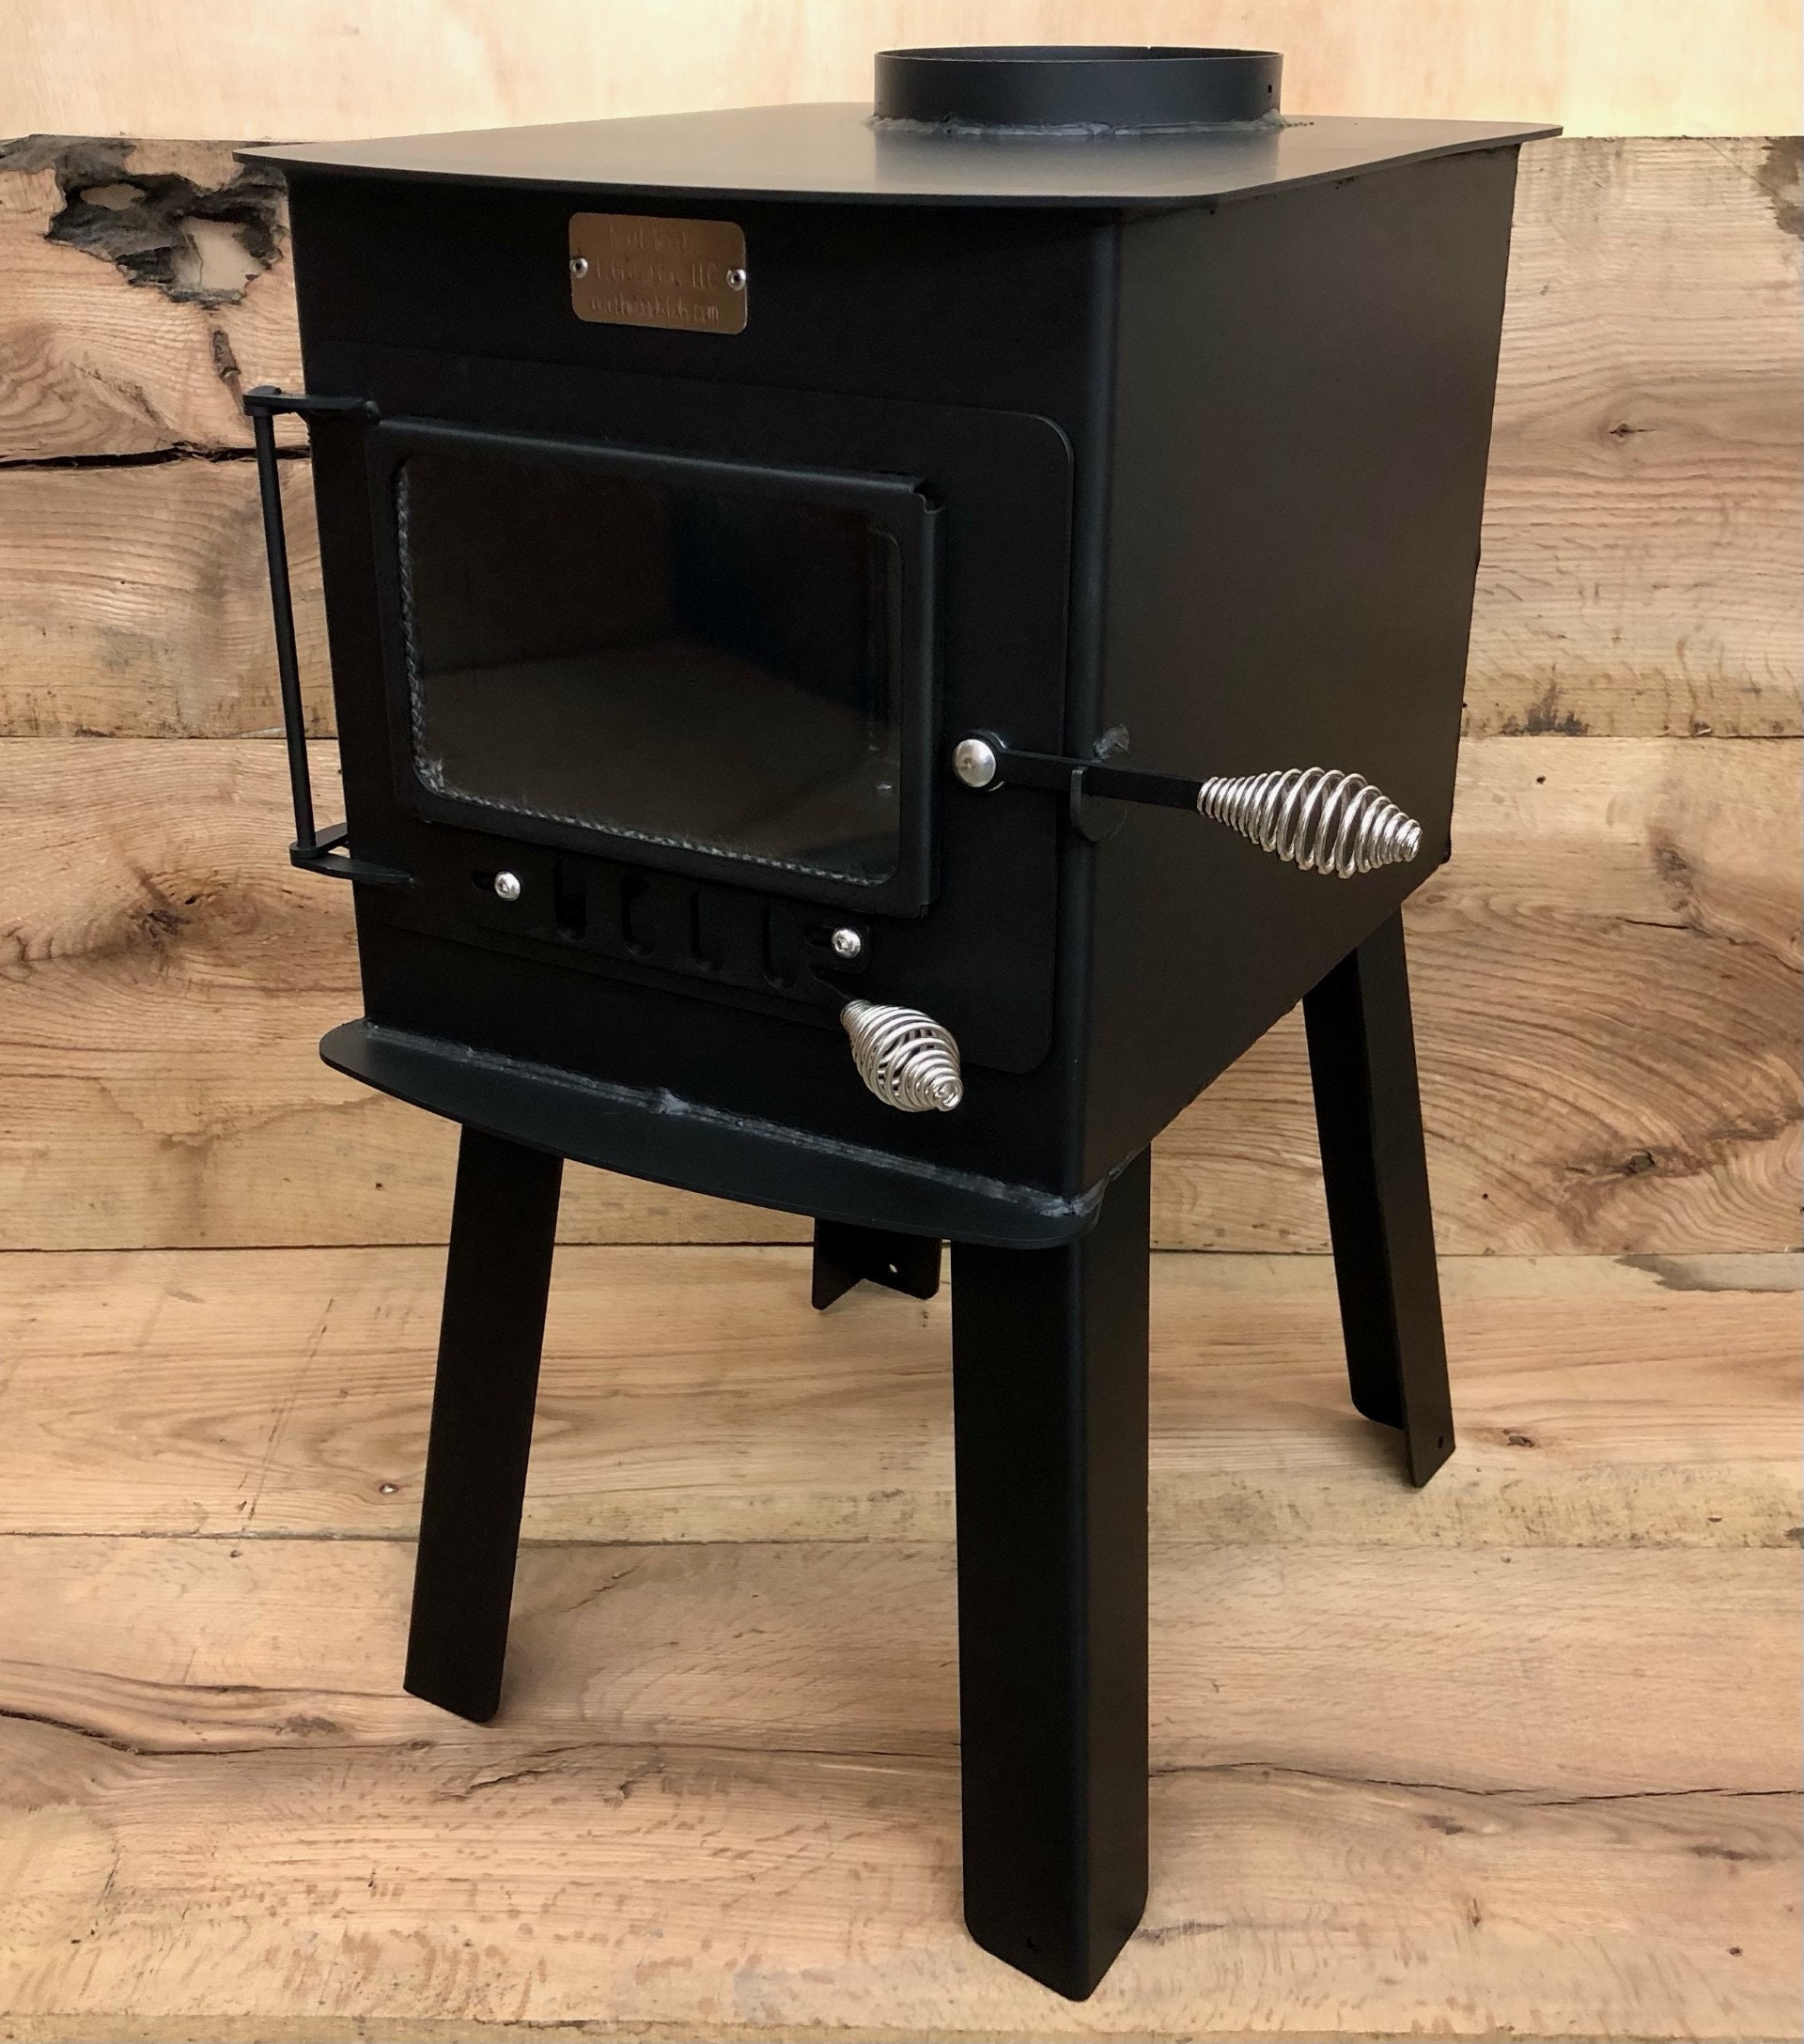 Country wood burning stove kit - household items - by owner - housewares  sale - craigslist